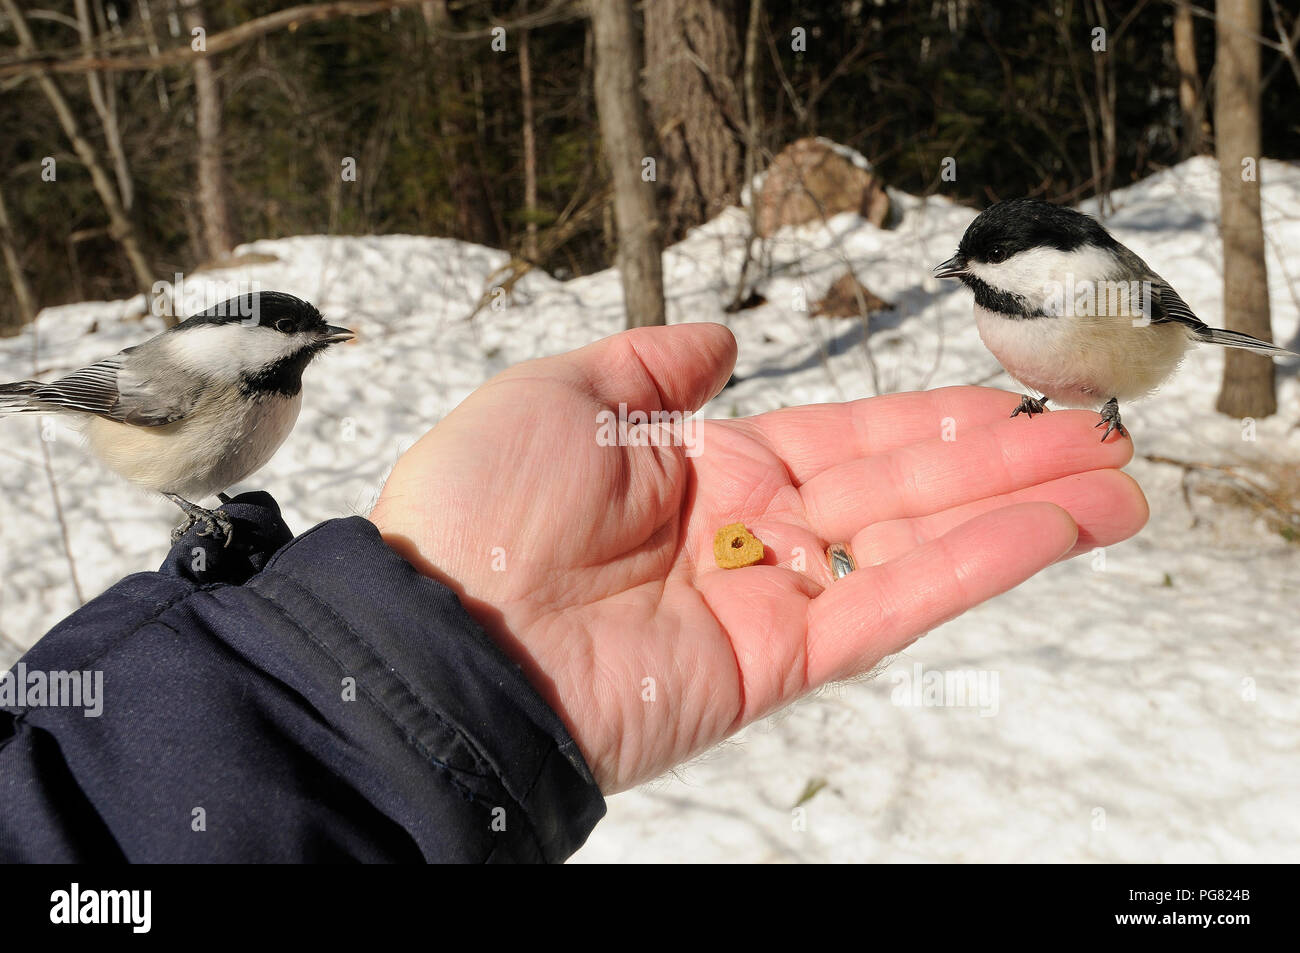 Chickadee birds on a human hand and enjoying its surrounding and environment while exposing its body. Stock Photo